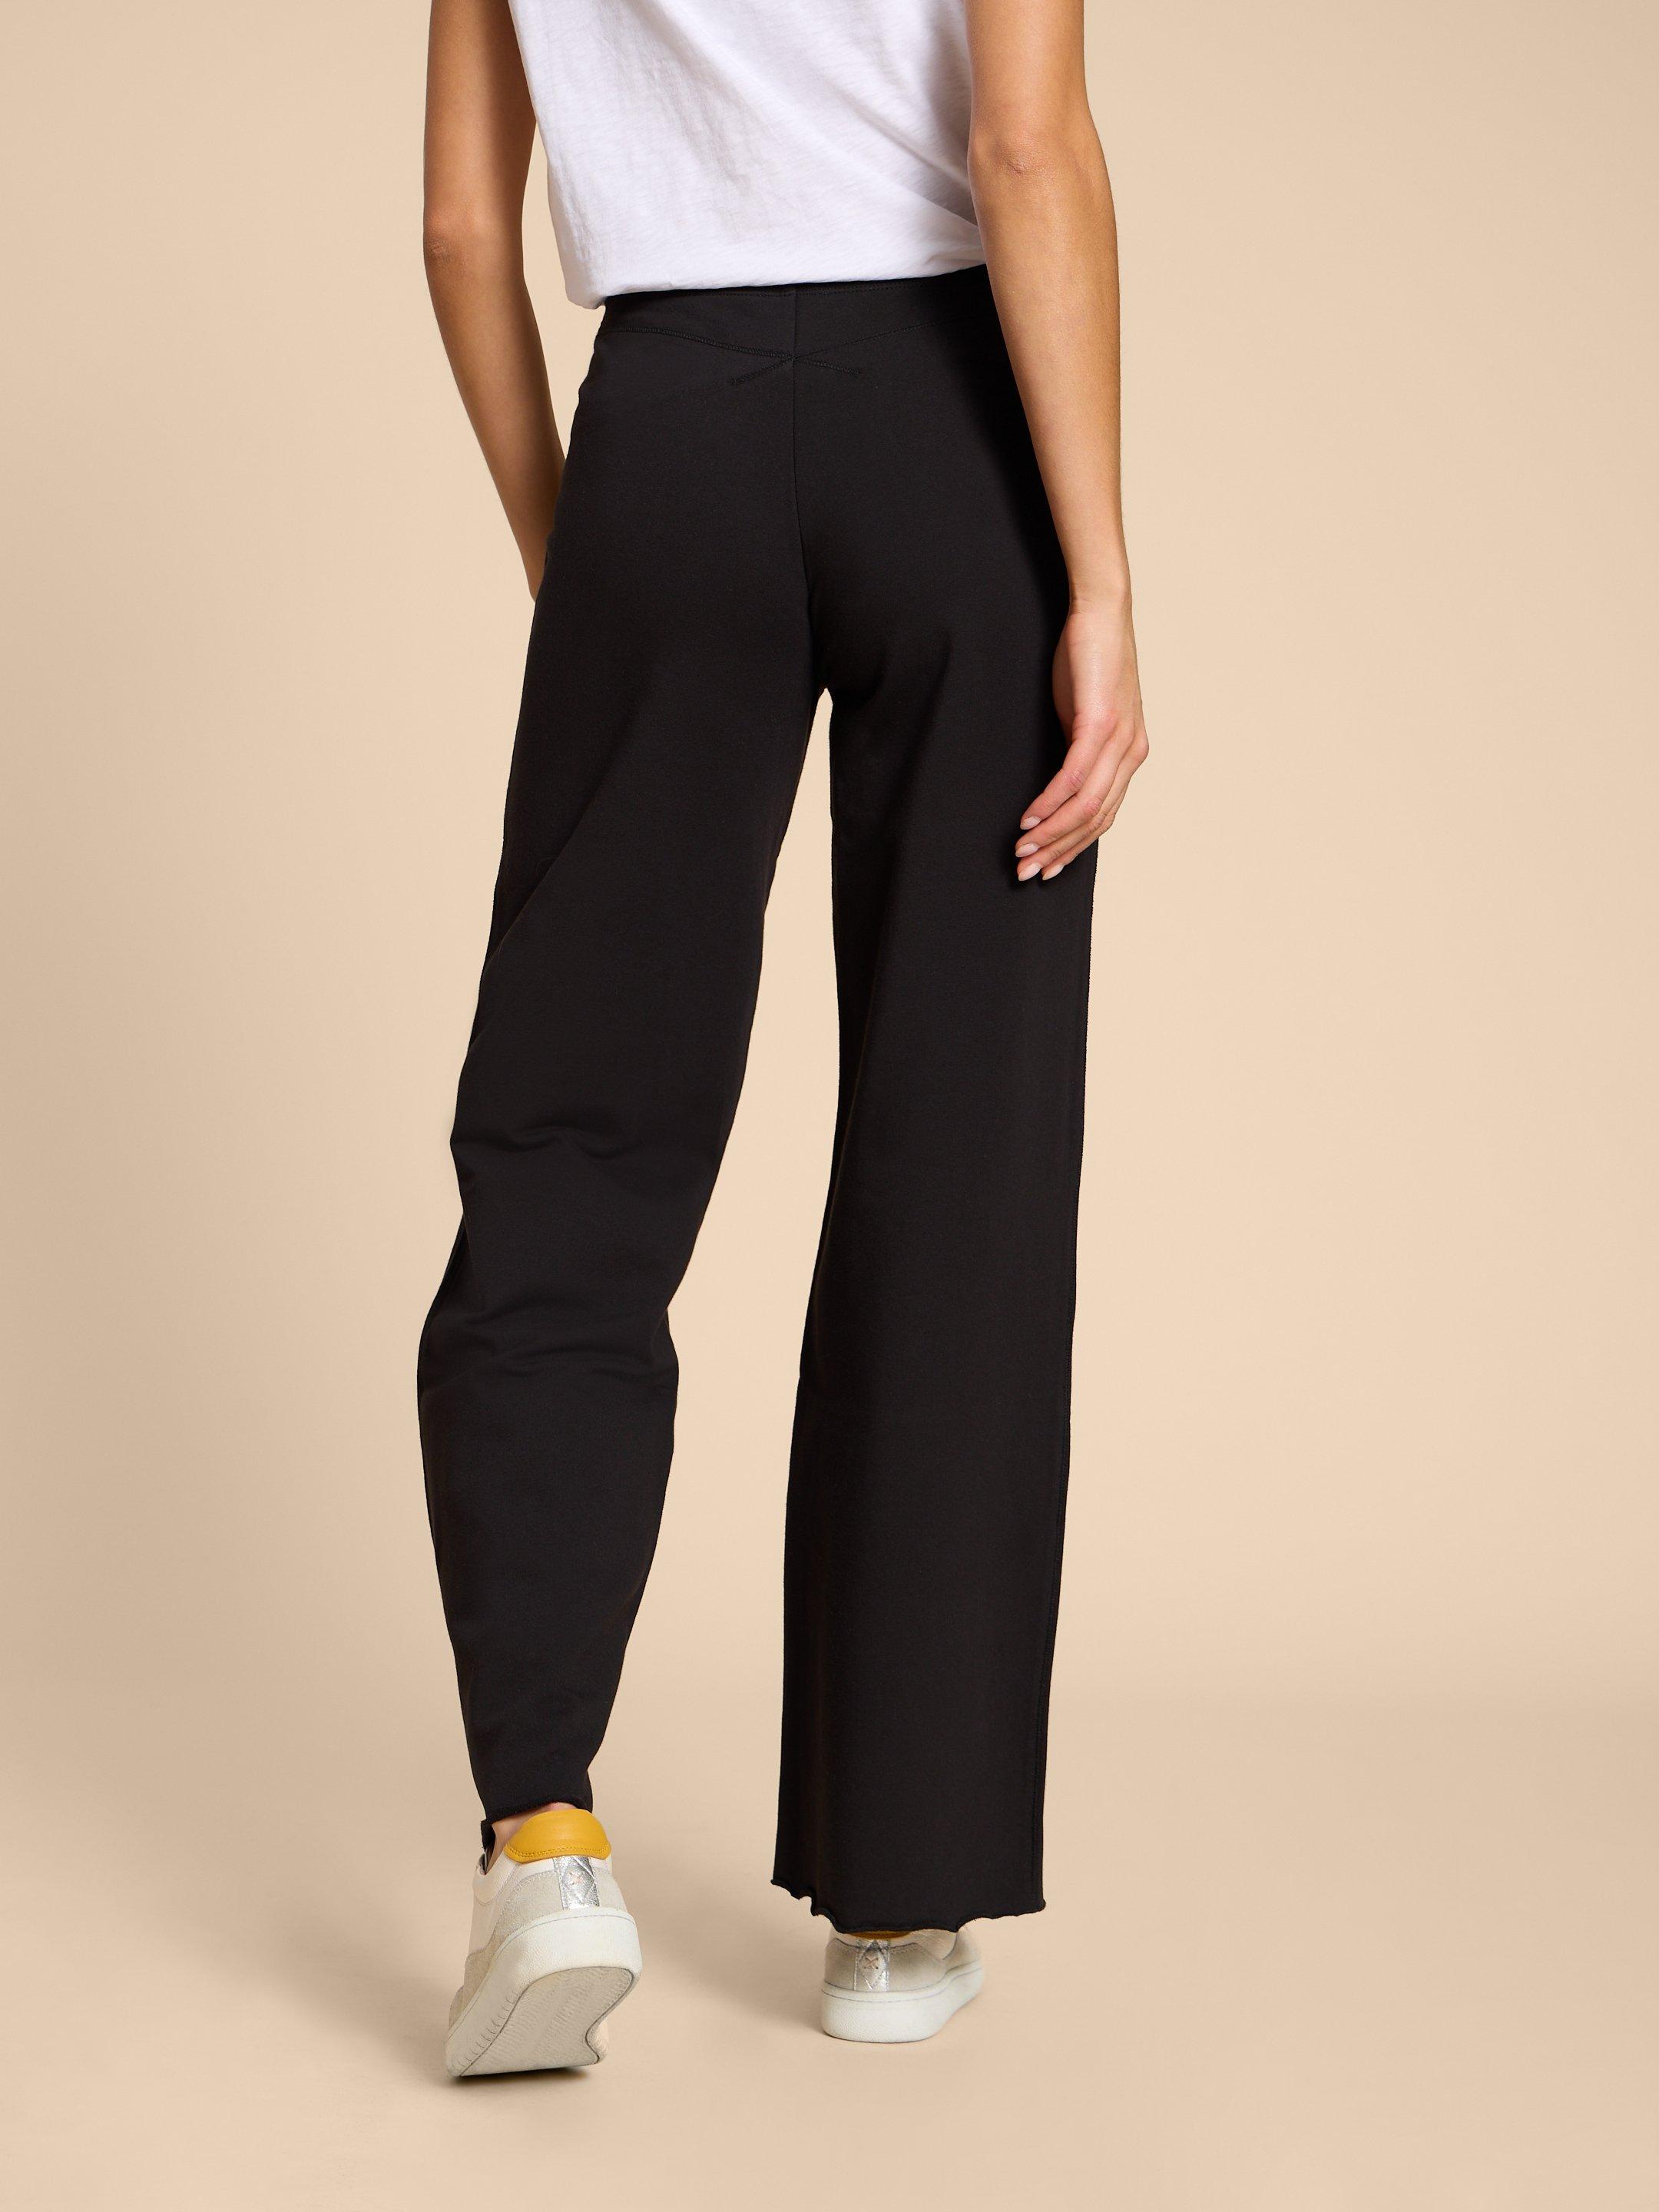 Dolce Organic Pant in PURE BLK - MODEL BACK